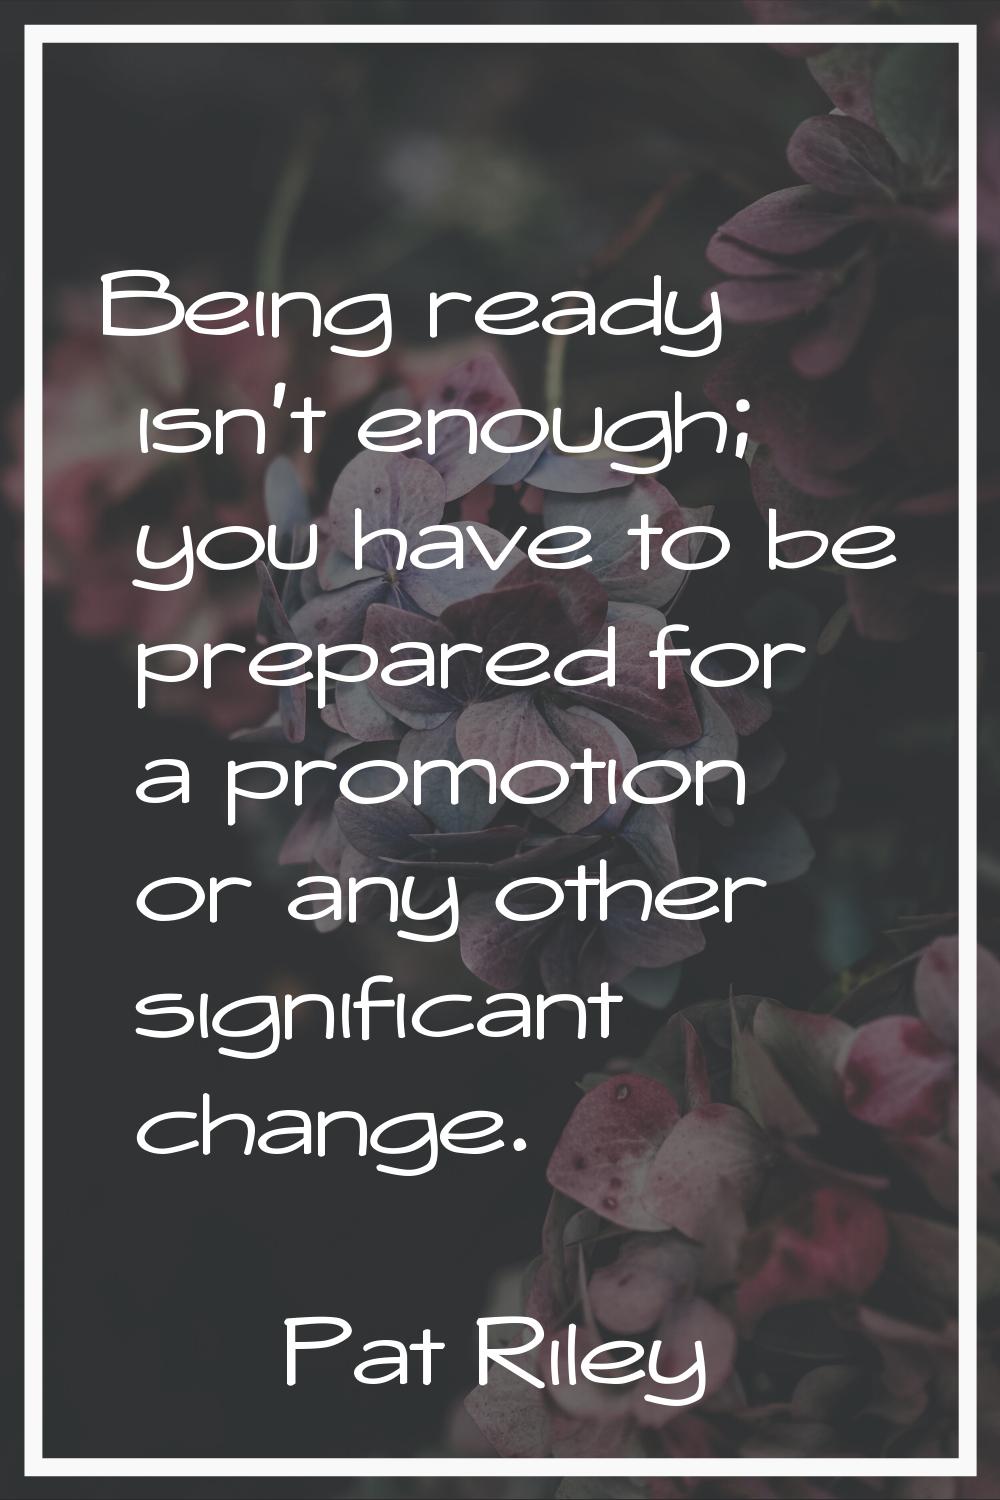 Being ready isn't enough; you have to be prepared for a promotion or any other significant change.